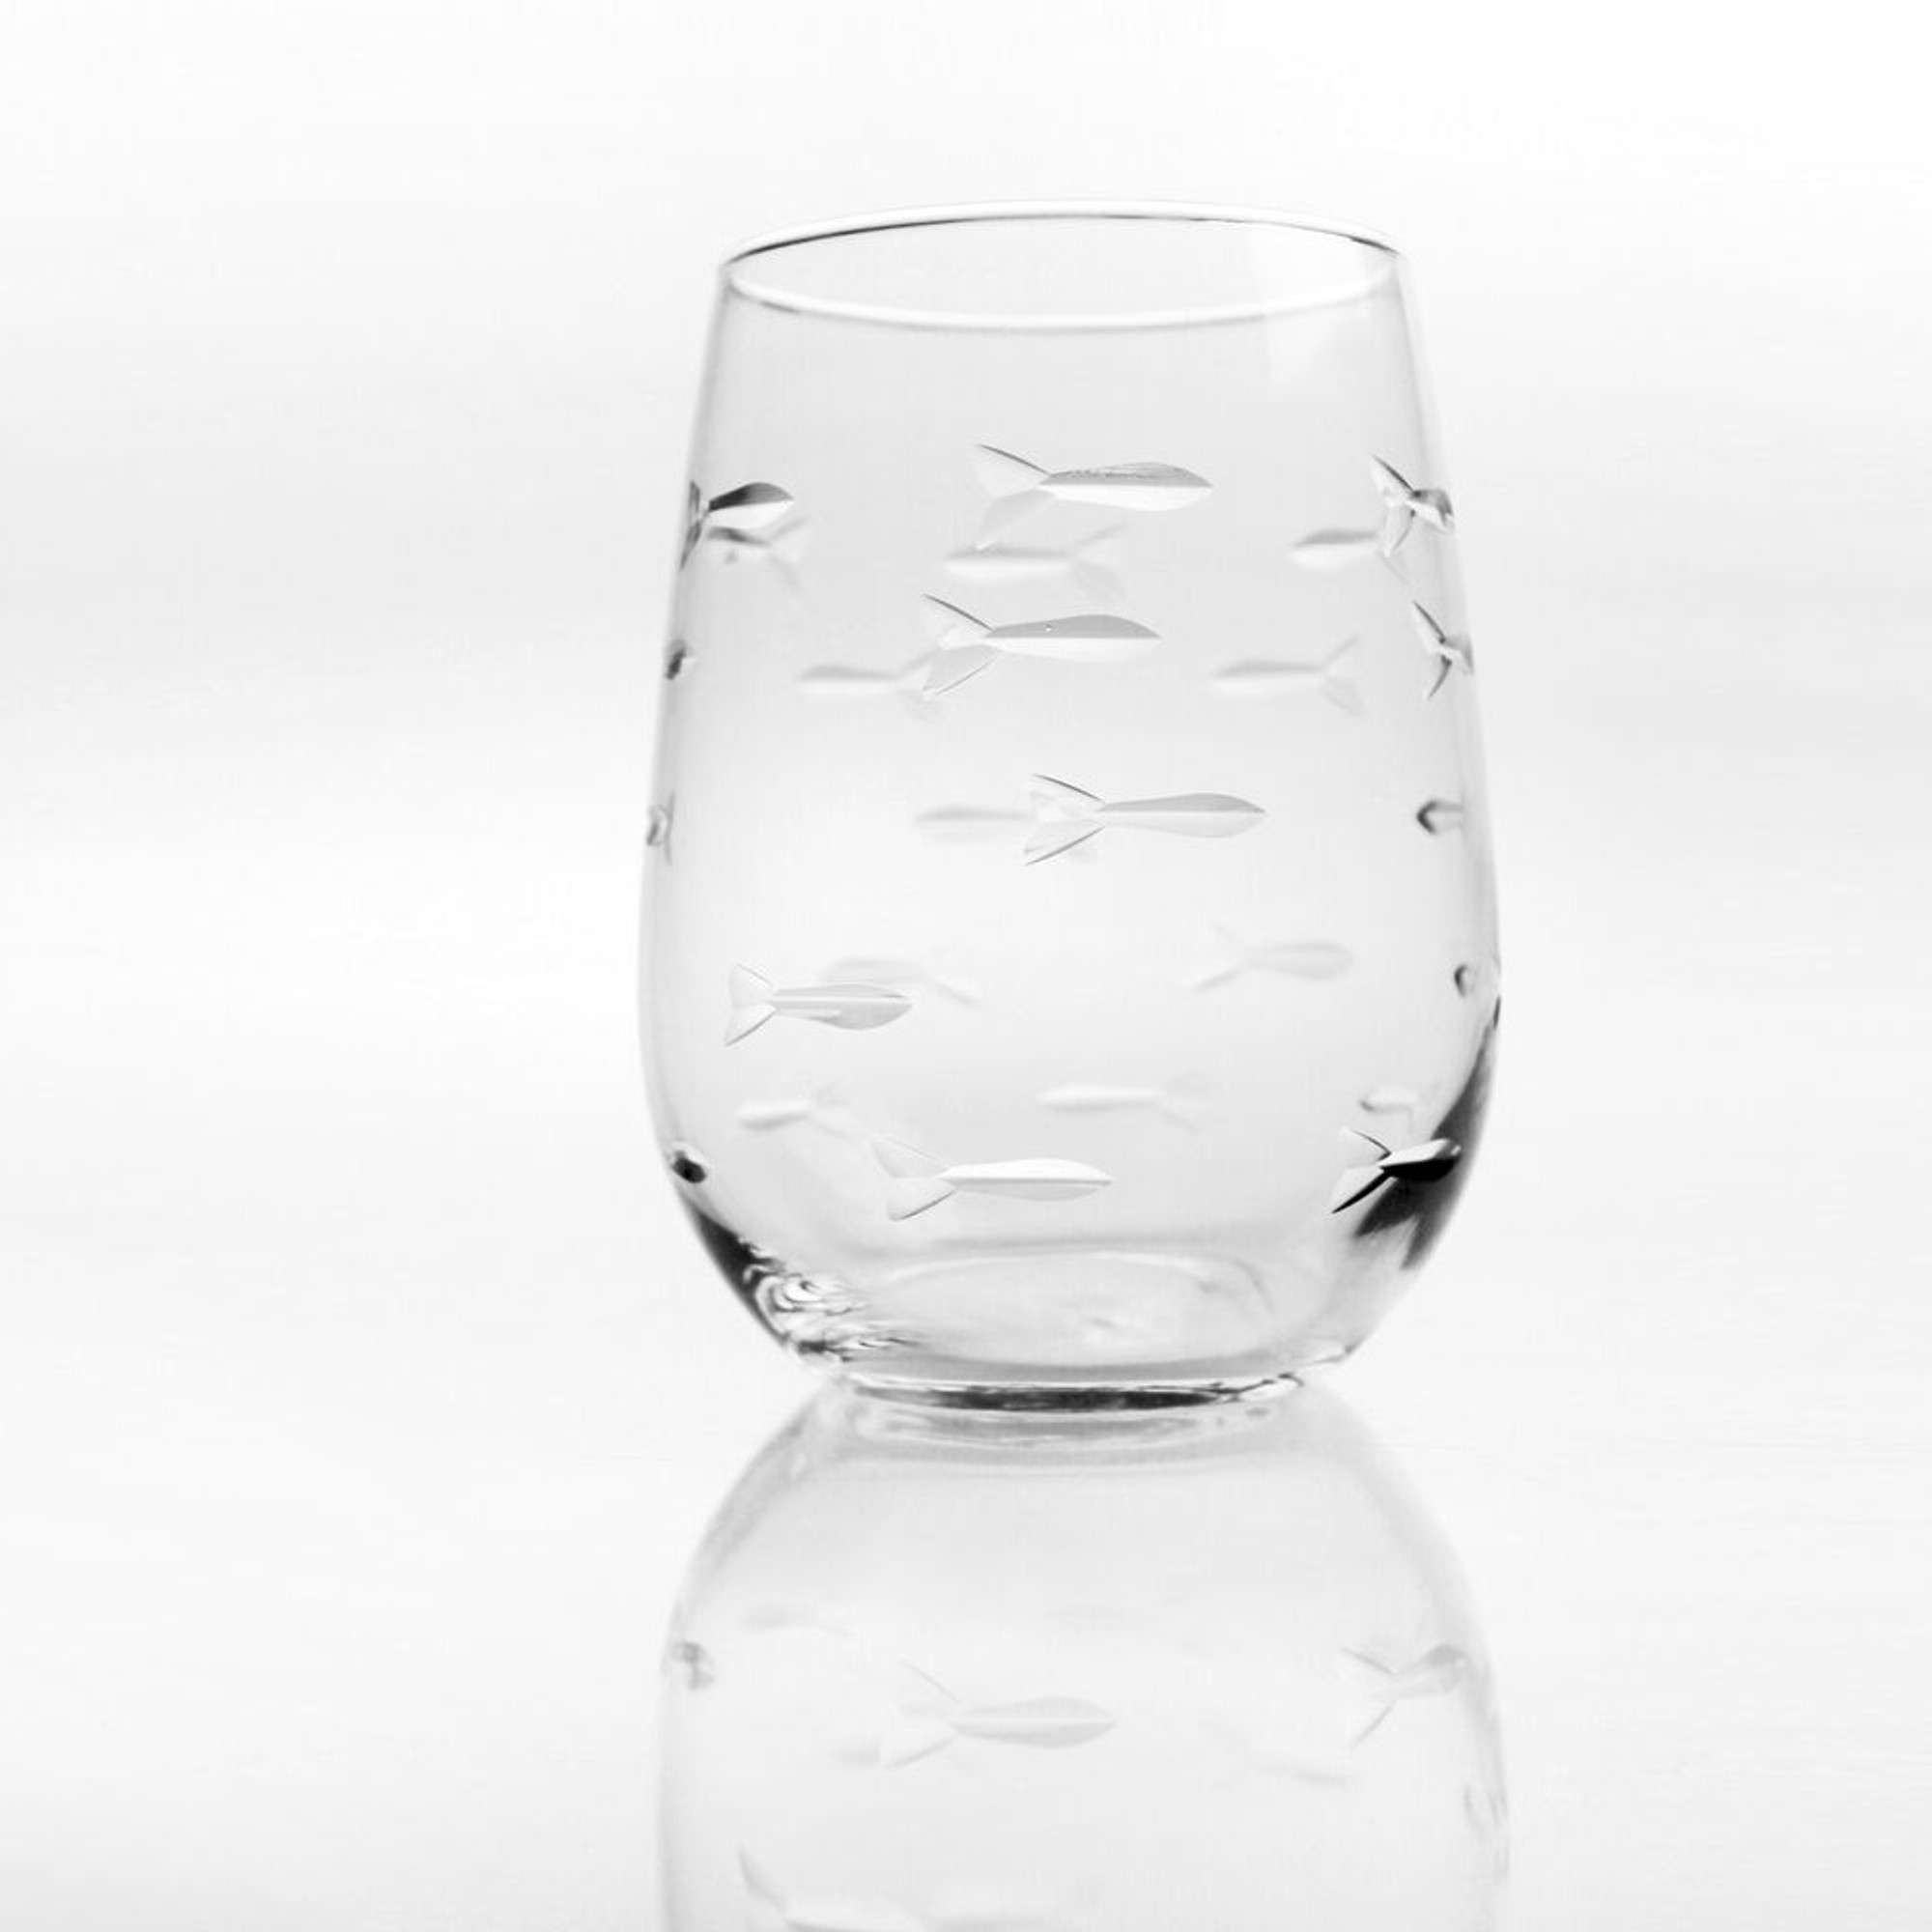 School of Fish Stemless Wine Glass Tumblers by Rolf Glass